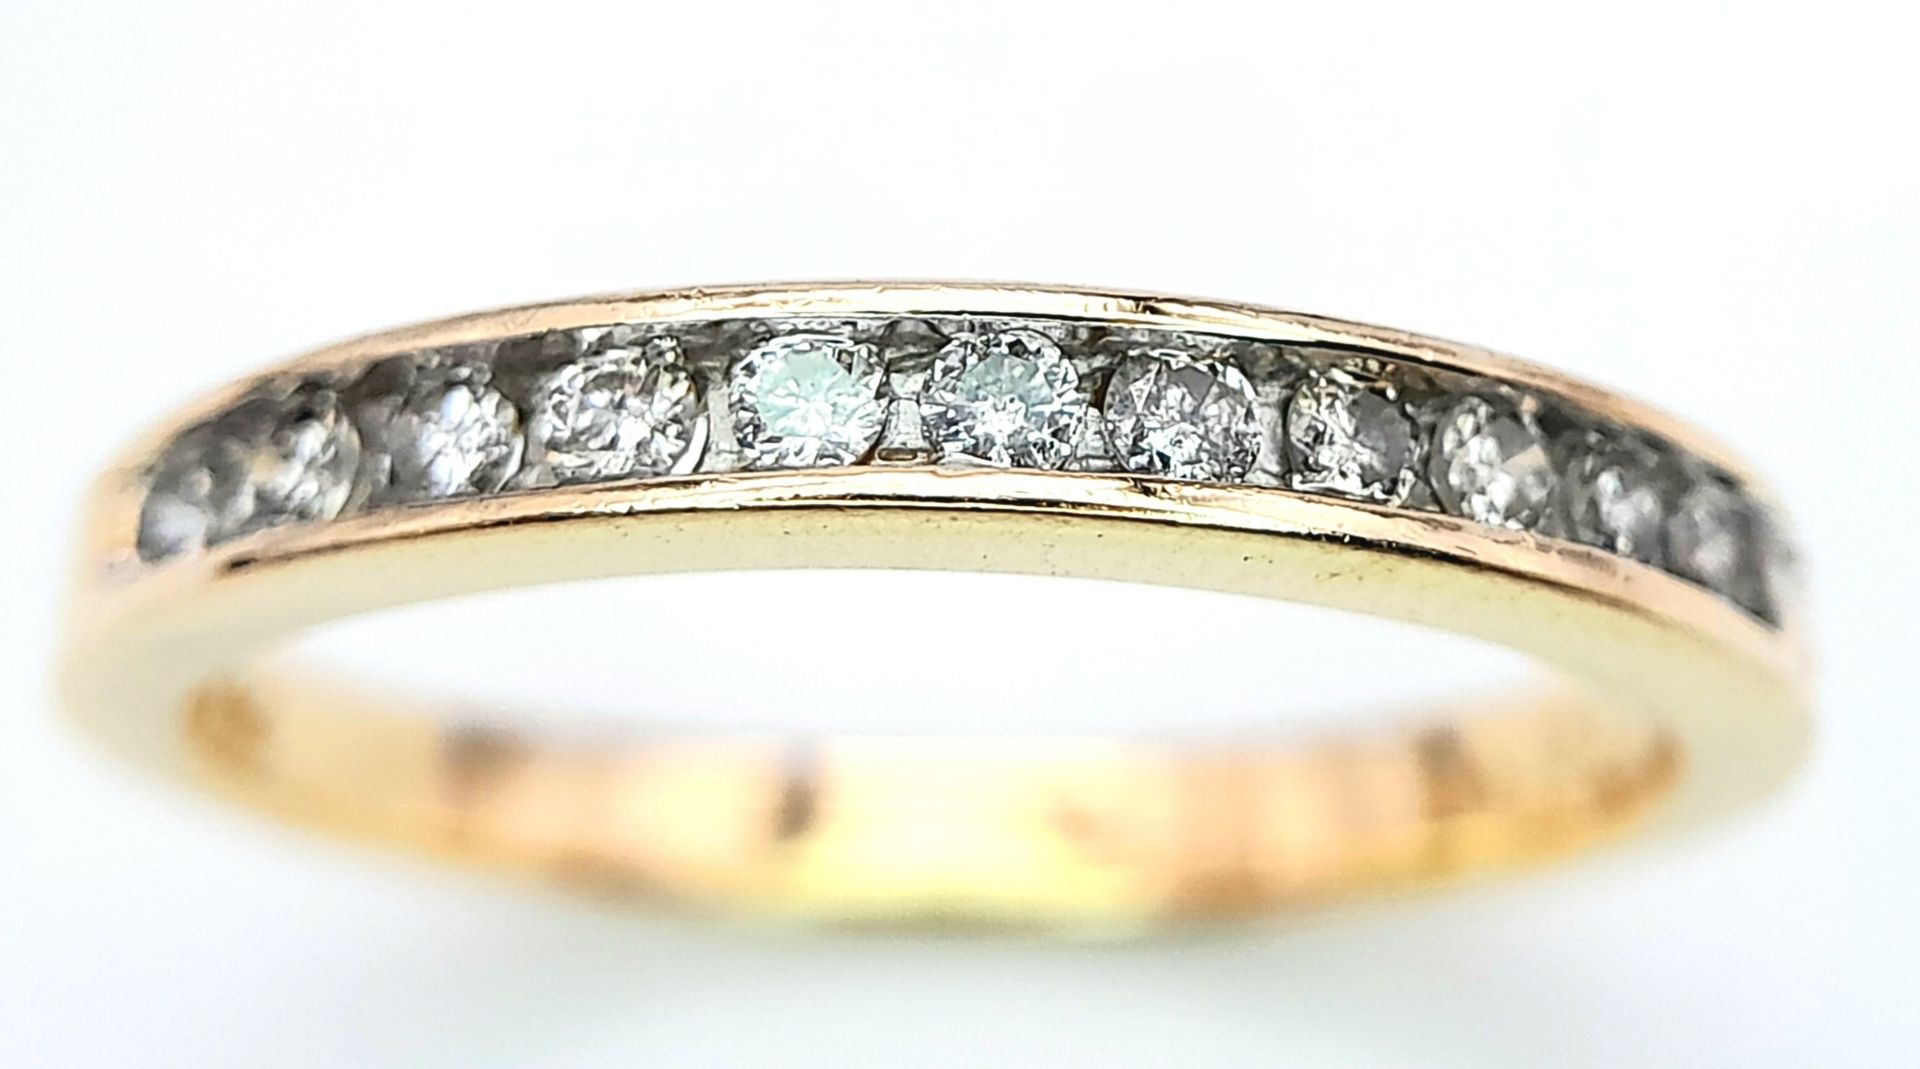 A 14K YELLOW GOLD DIAMOND HALF ETERNITY RING. 0.25ctw, Size N, 2.4g total weight. Ref: SC 8049 - Image 4 of 6